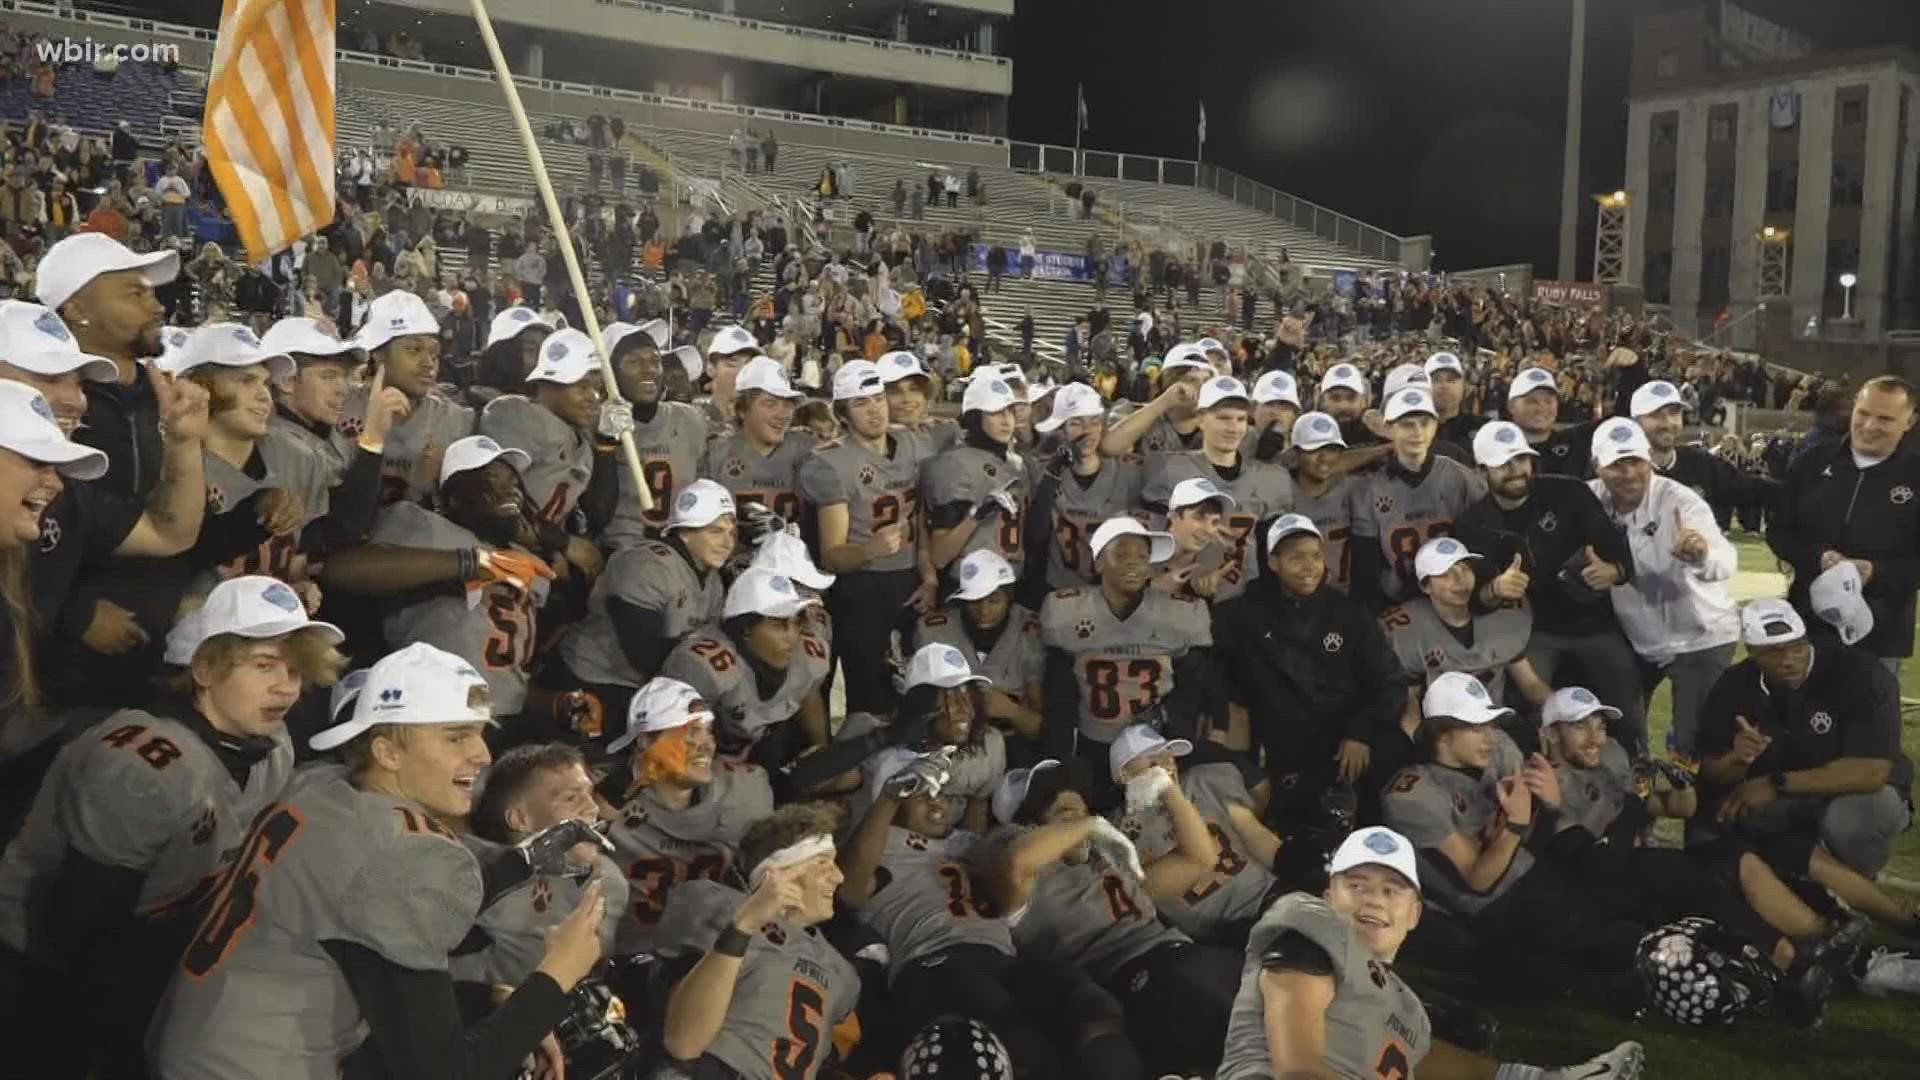 Powell High School beat Page High School 42-34 for their first state championship.